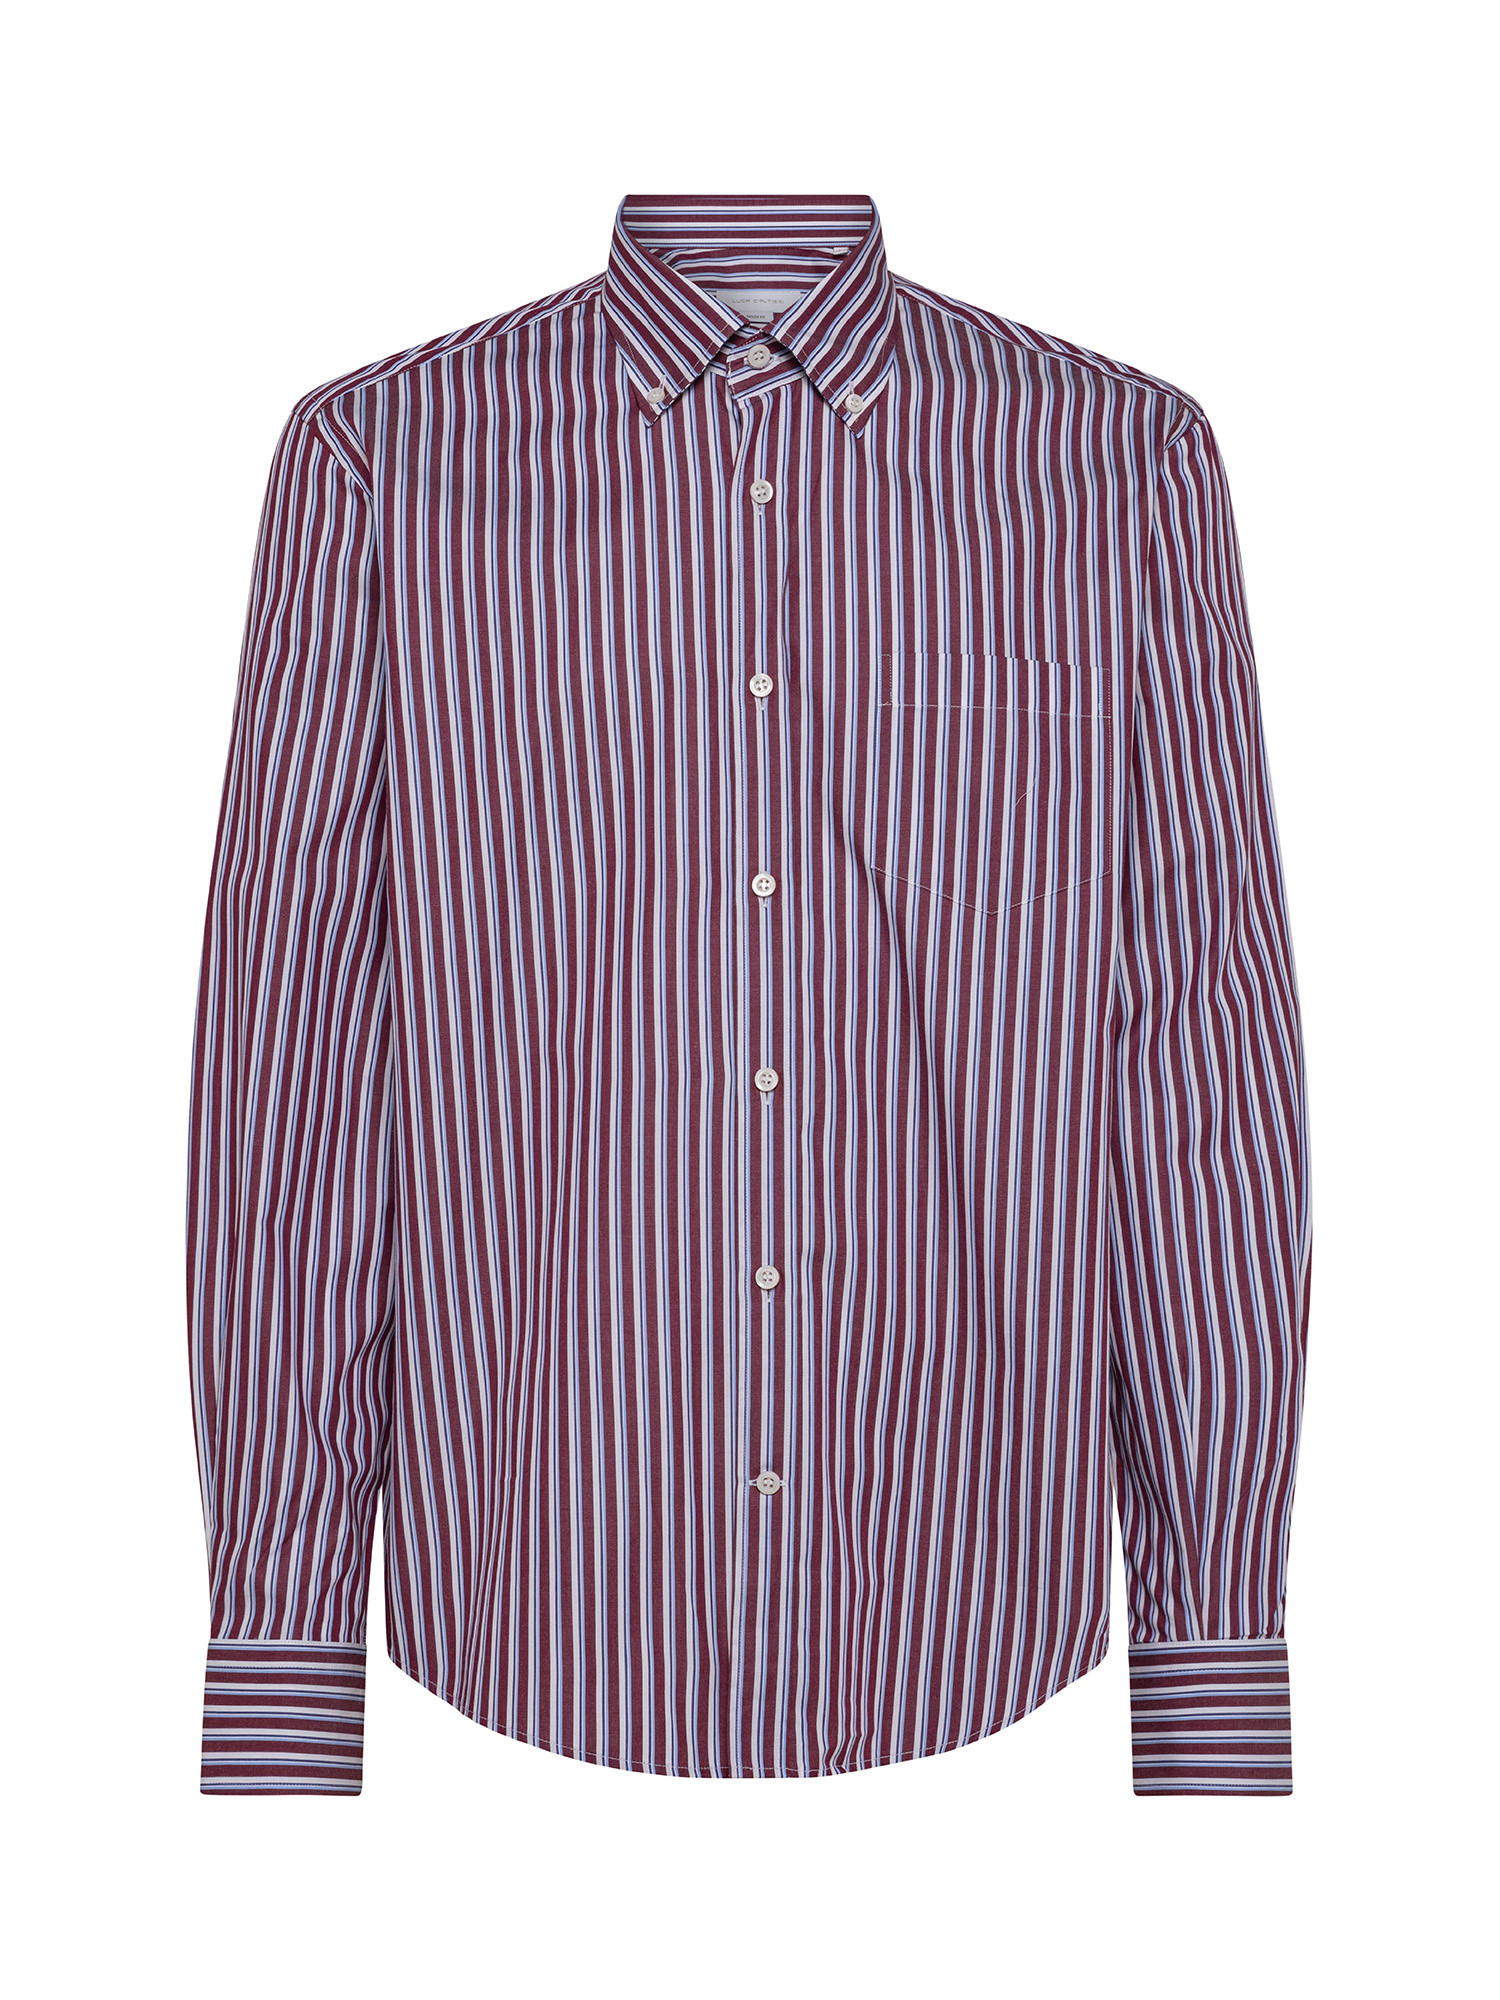 Luca D'Altieri - Camicia a righe tailor fit in puro cotone, Rosso bordeaux, large image number 1